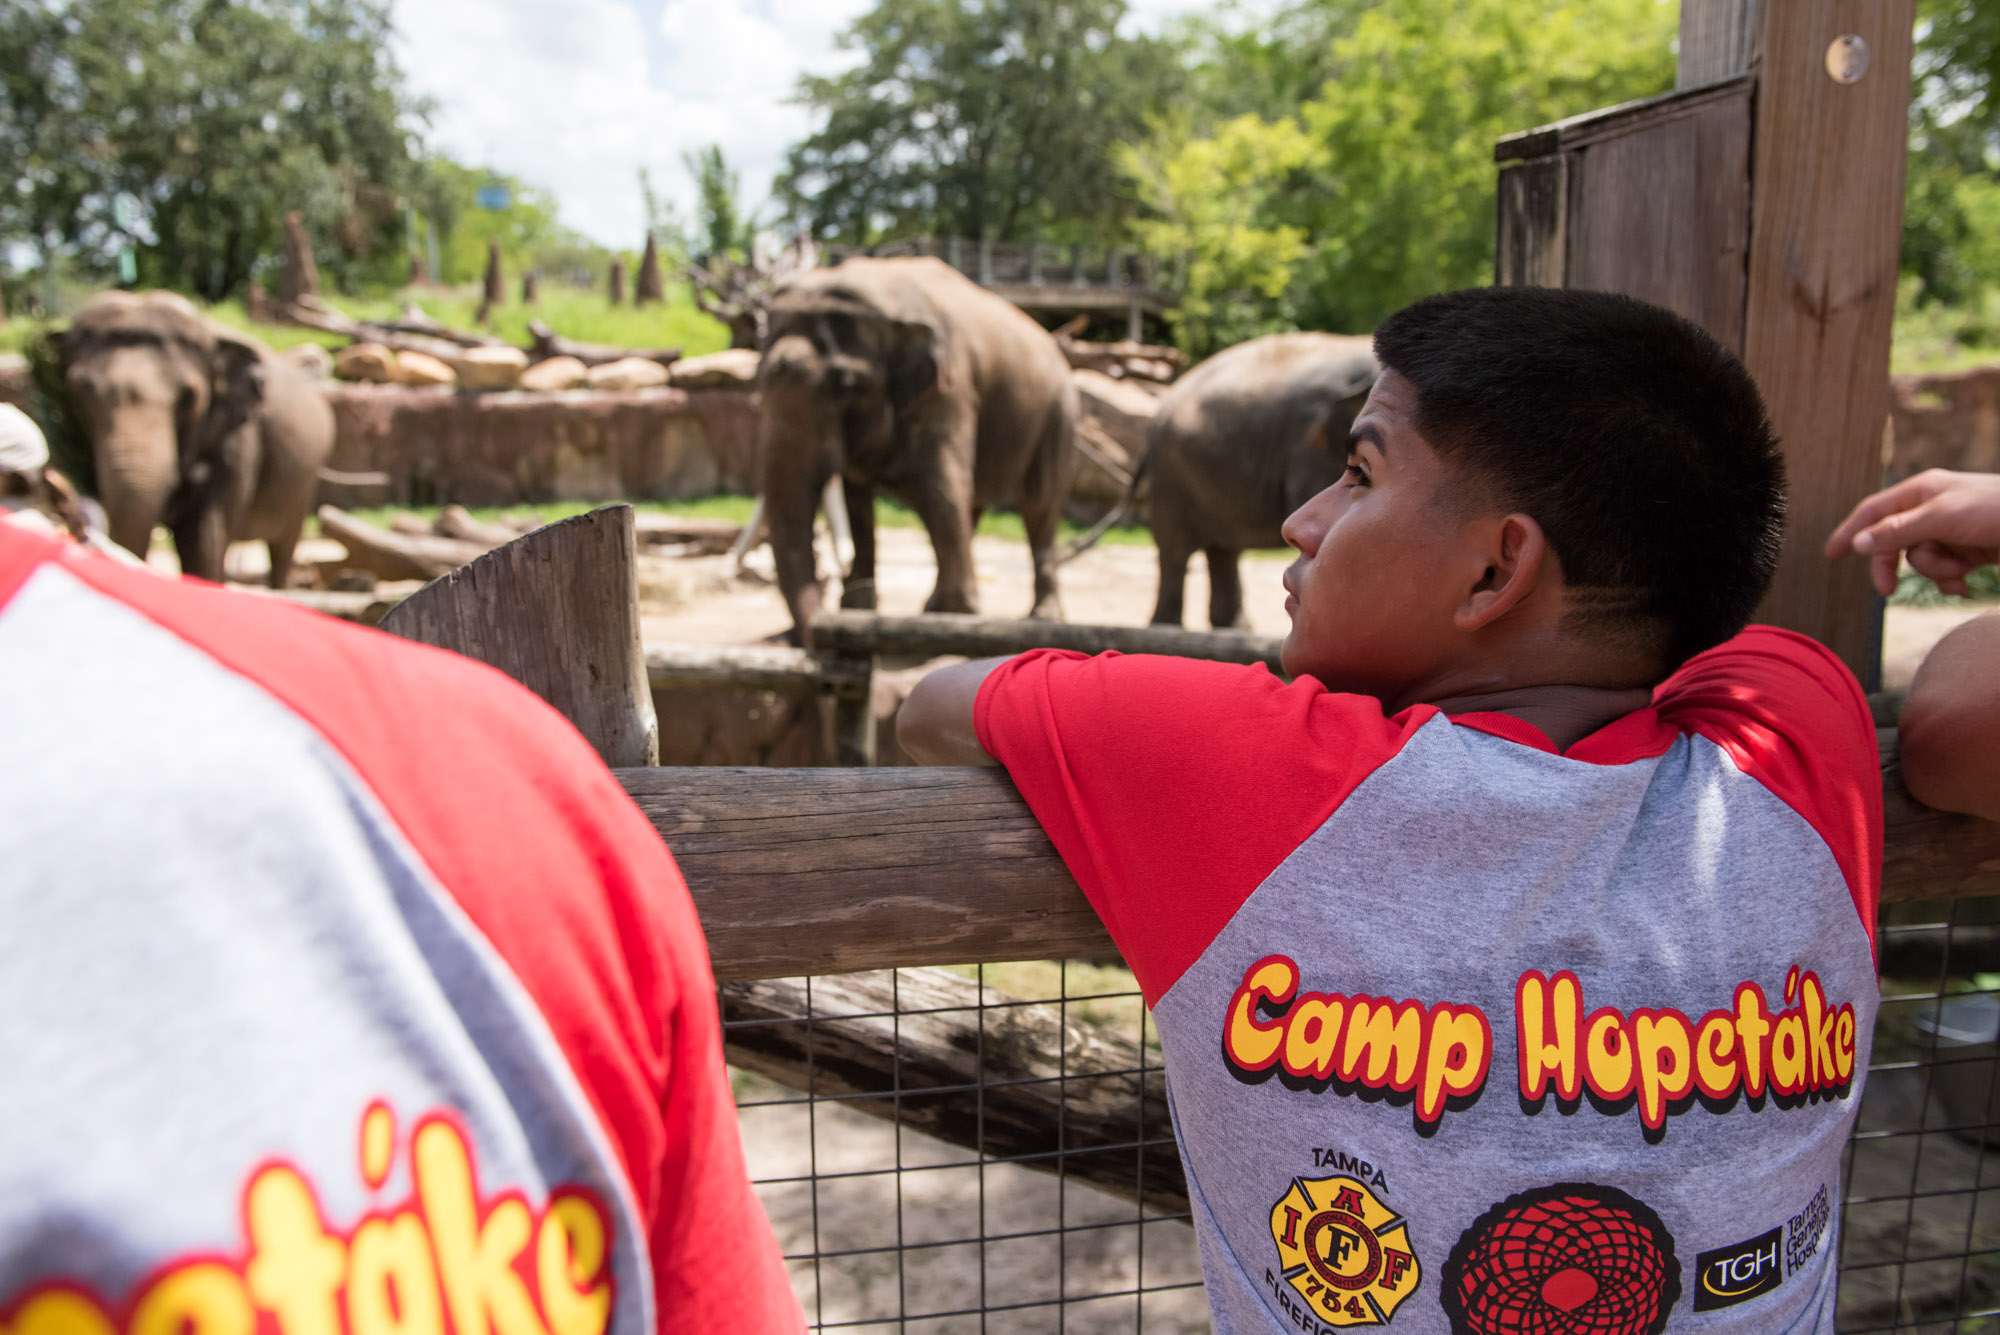 Group of boys looking at the elephants at Busch Gardens with Camp Hopetake